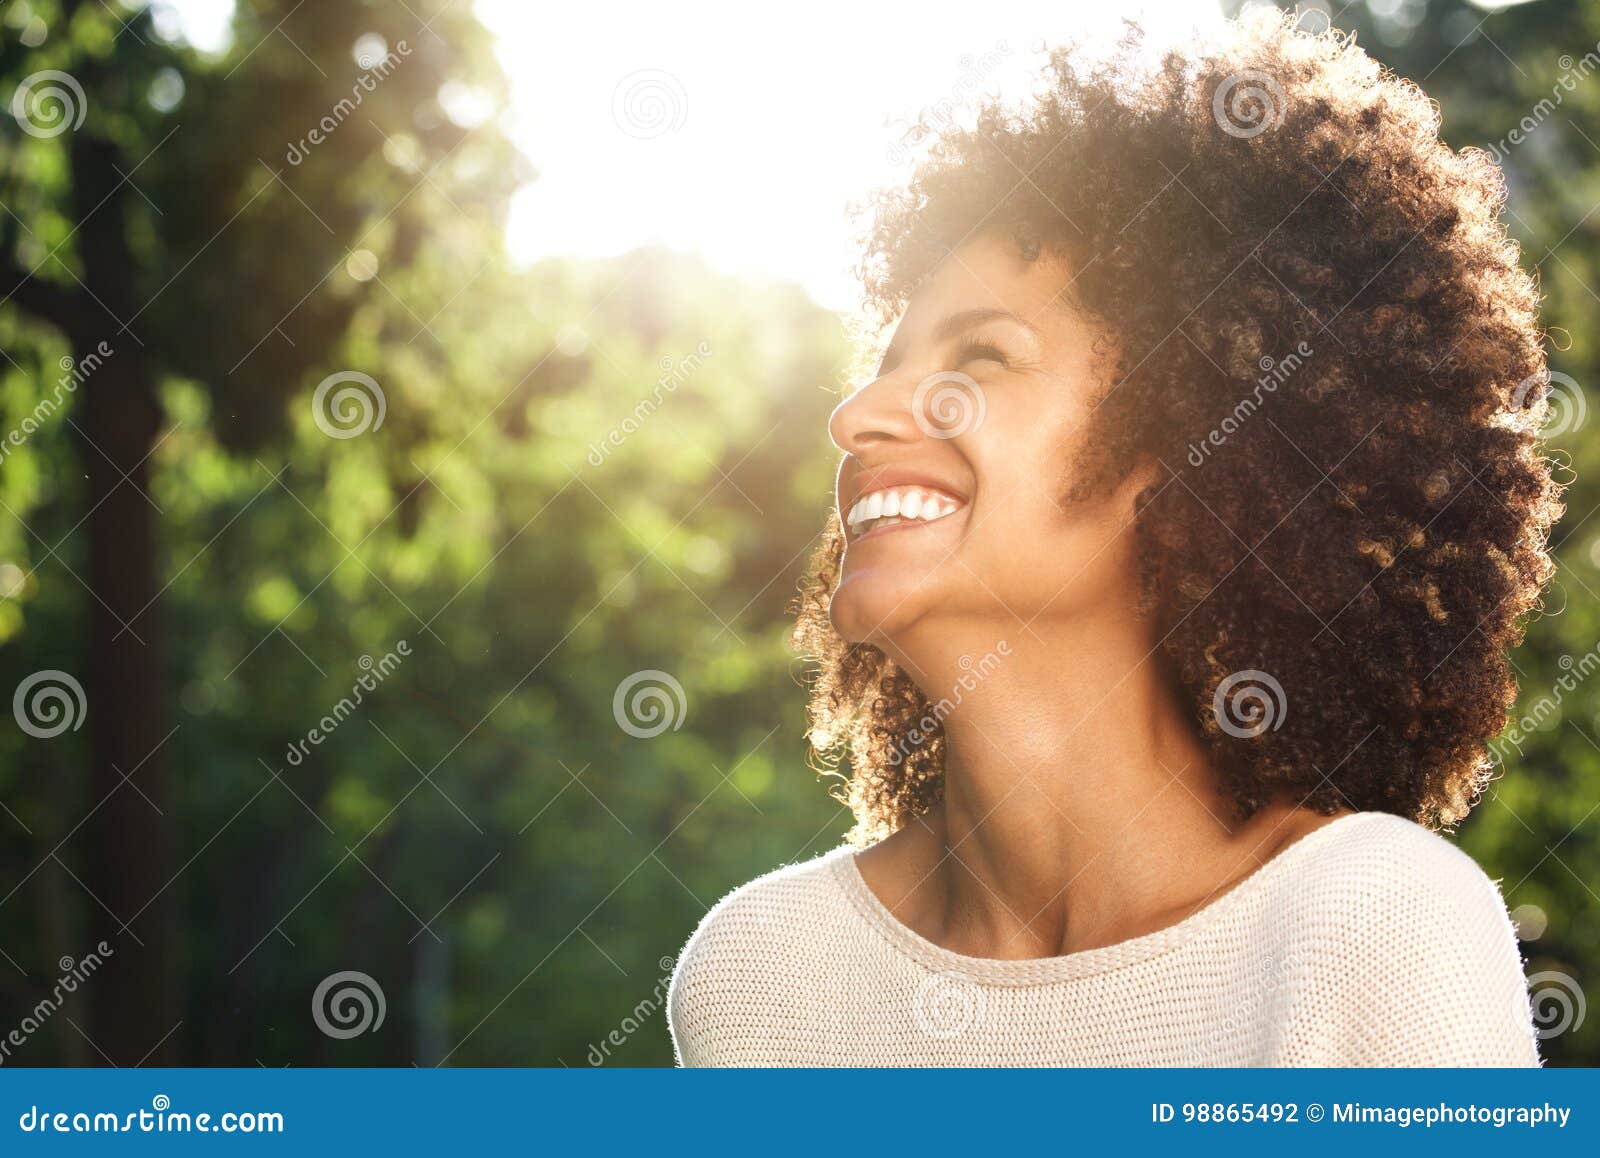 close up portrait of beautiful confident woman laughing in nature